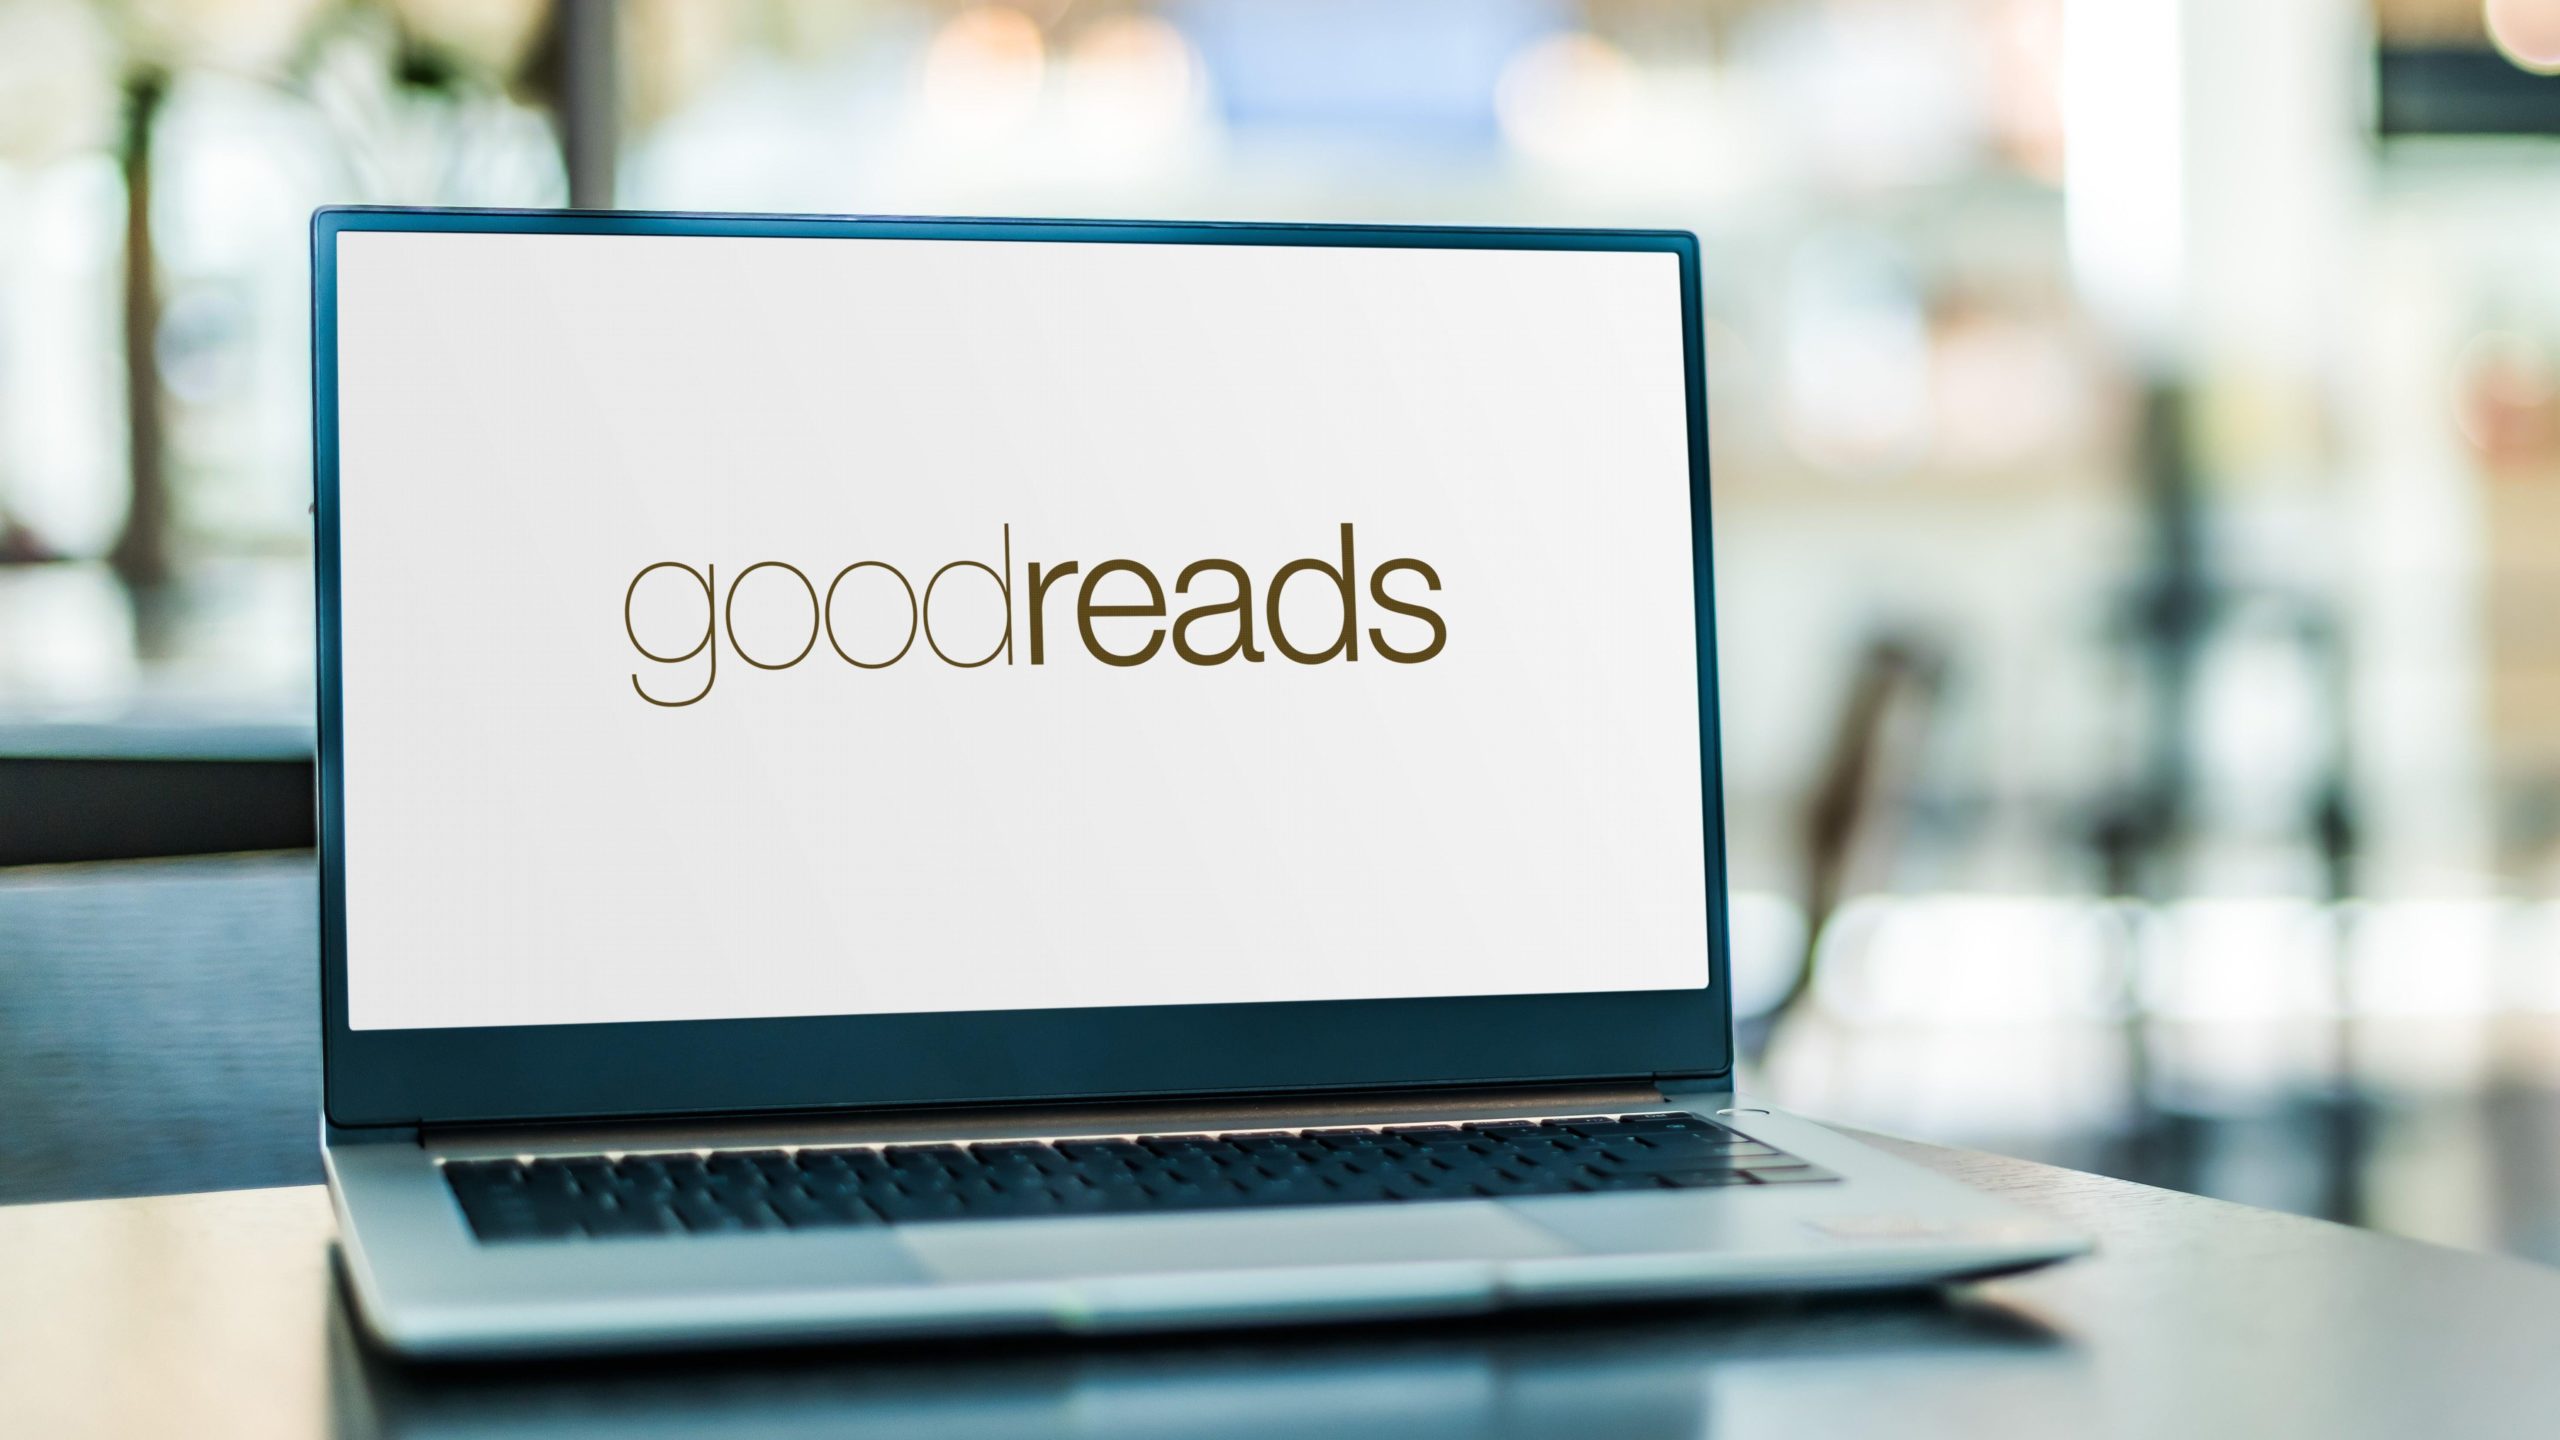 8 Ways to Make Goodreads Less Annoying